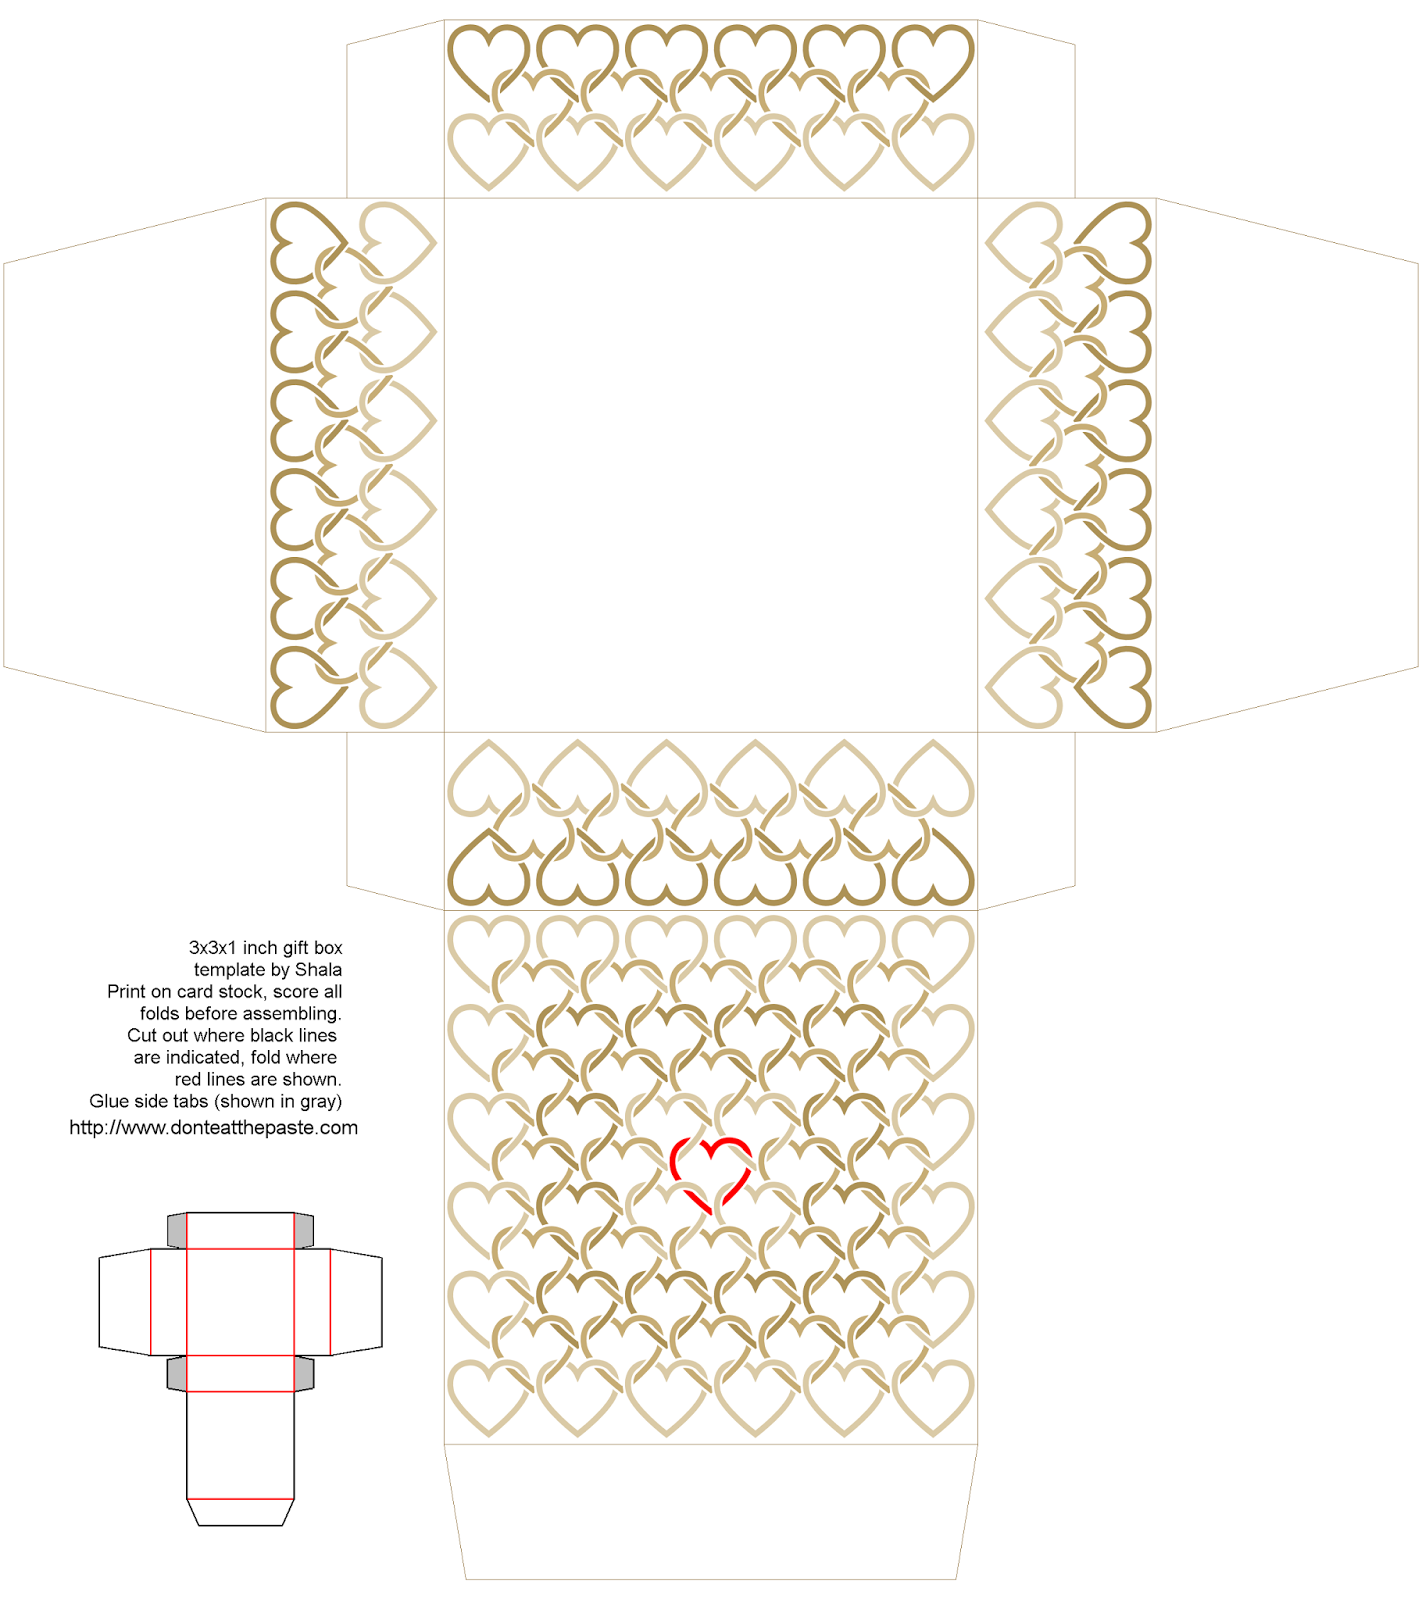 3x3x1 inch printable linked hearts box in tan and red- also available in a different size and in blue and orange